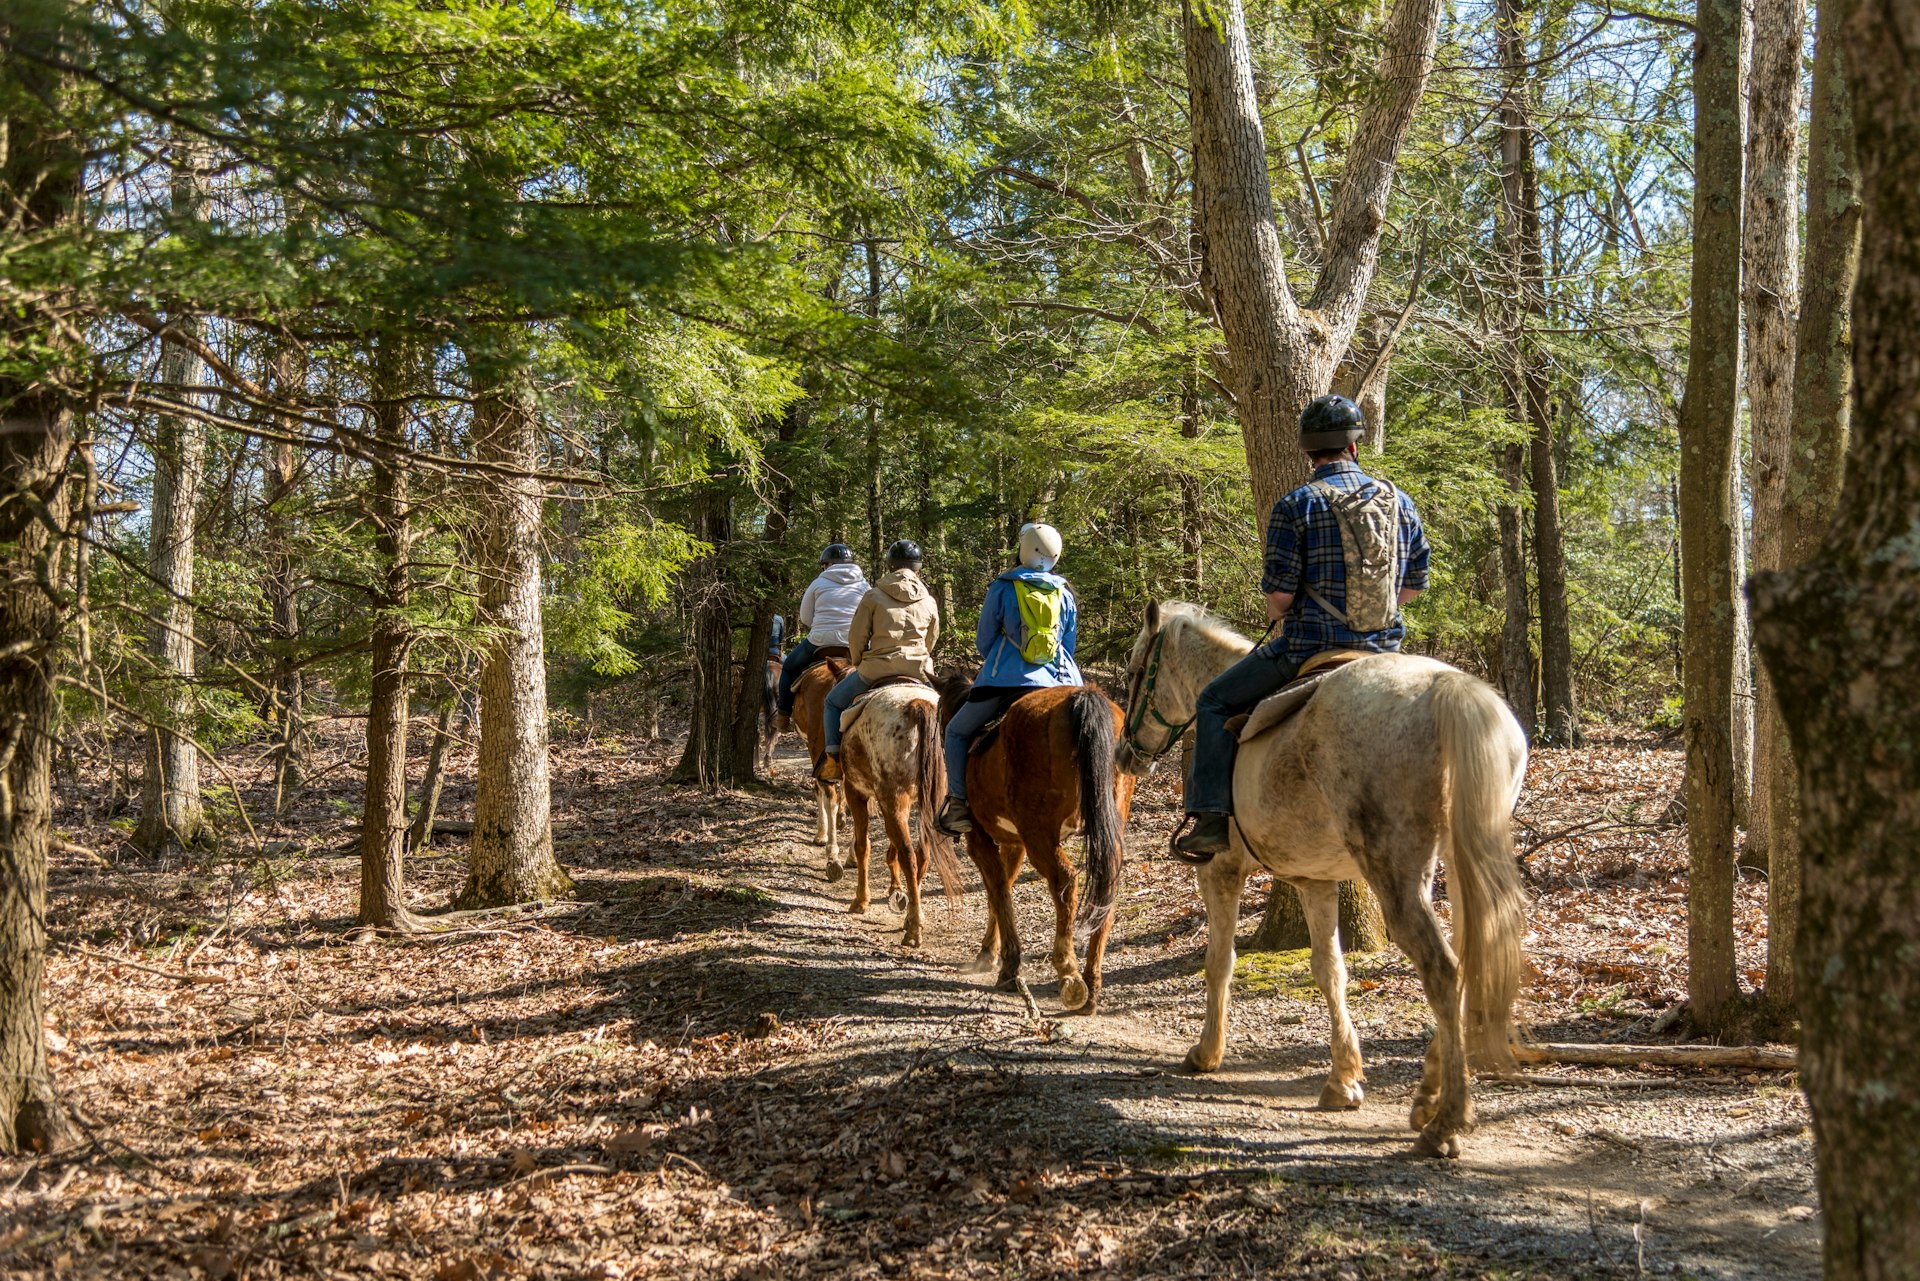 A group of people riding horses on a trail through the woods near Skyline Drive, Virginia